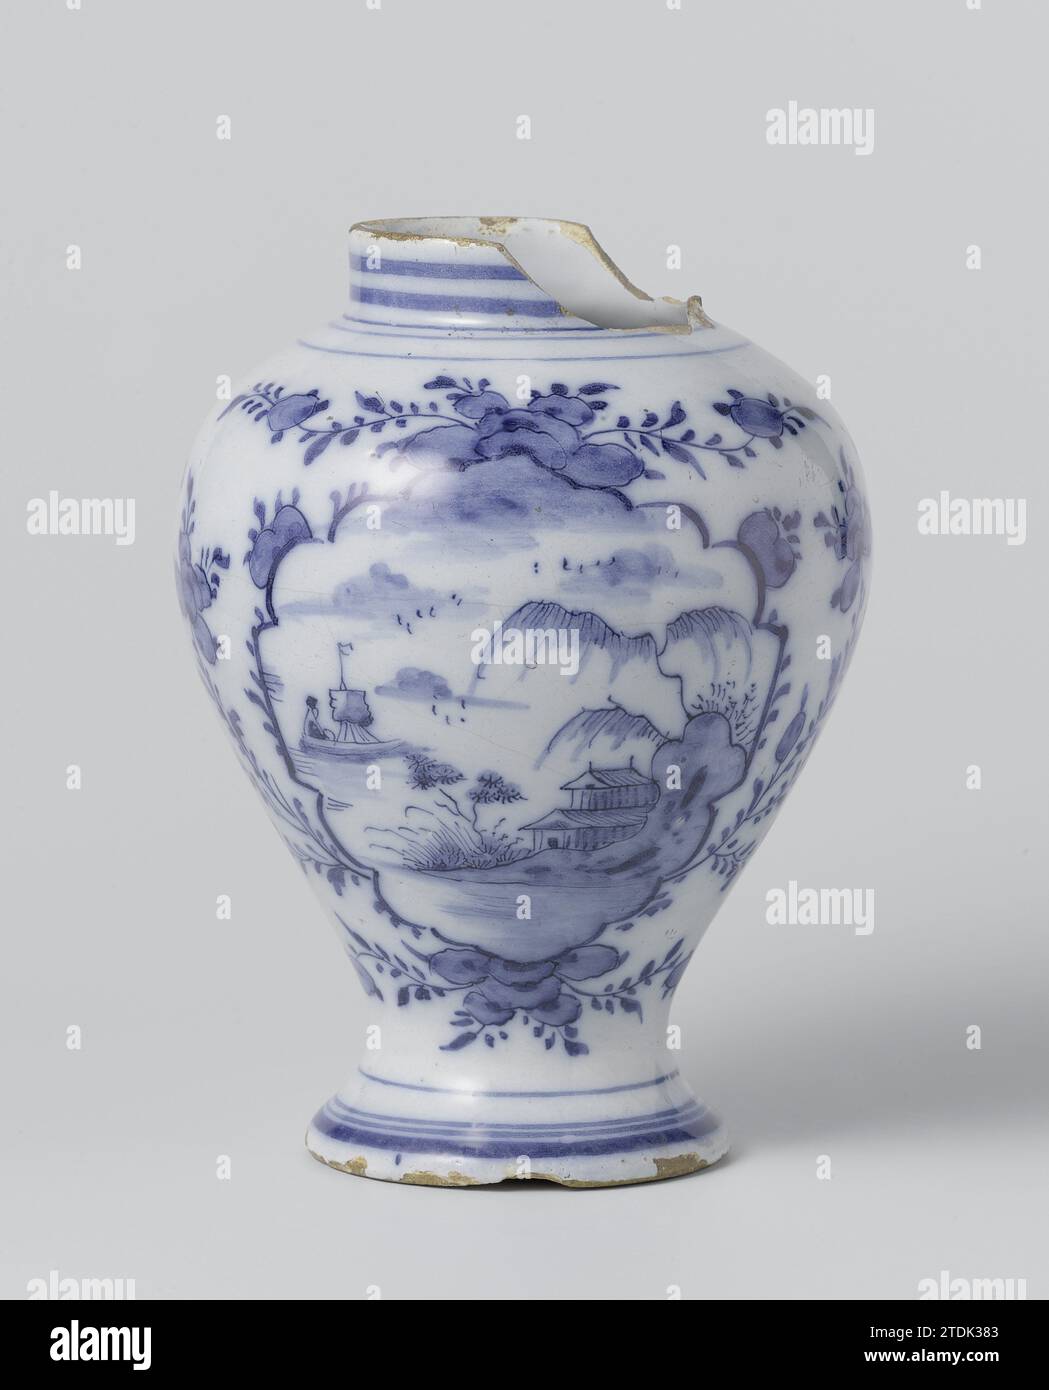 Vase, c. 1760 - c. 1800 Vase van Faience, painted in blue in the glaze with a landscape after Chinese example. Delft . Vase van Faience, painted in blue in the glaze with a landscape after Chinese example. Delft . Stock Photo